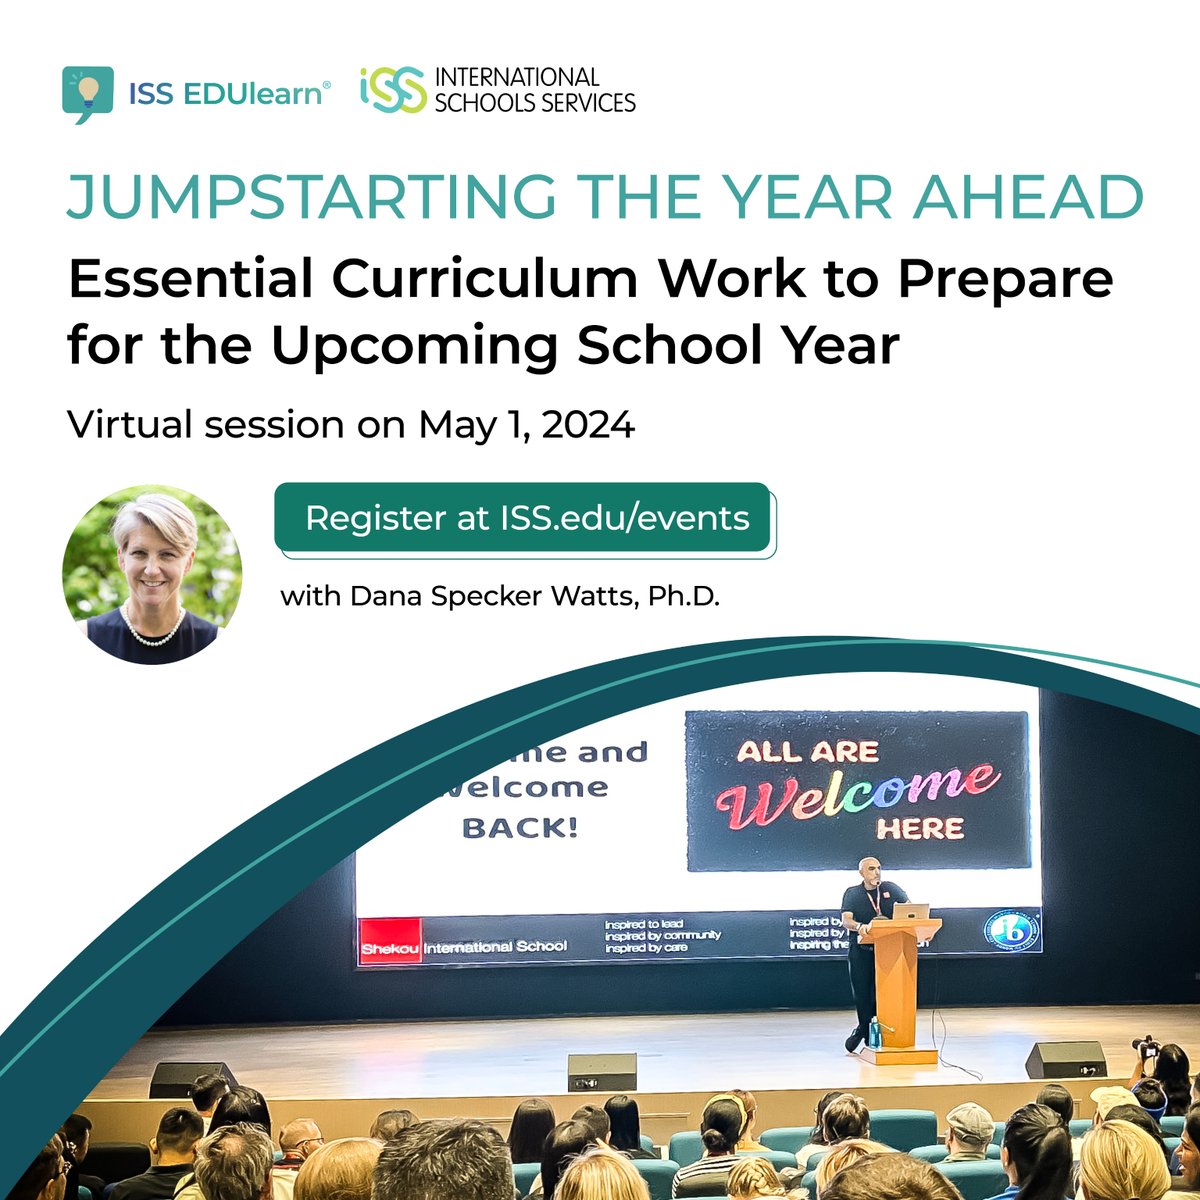 1 week away: Kickstart your curriculum preparation for the upcoming school year! Register at iss.education/jumpstart24 and dive into planning, instructional design, and assessment techniques for an impactful year ahead. #ISSedu #EdChat #TeacherPD